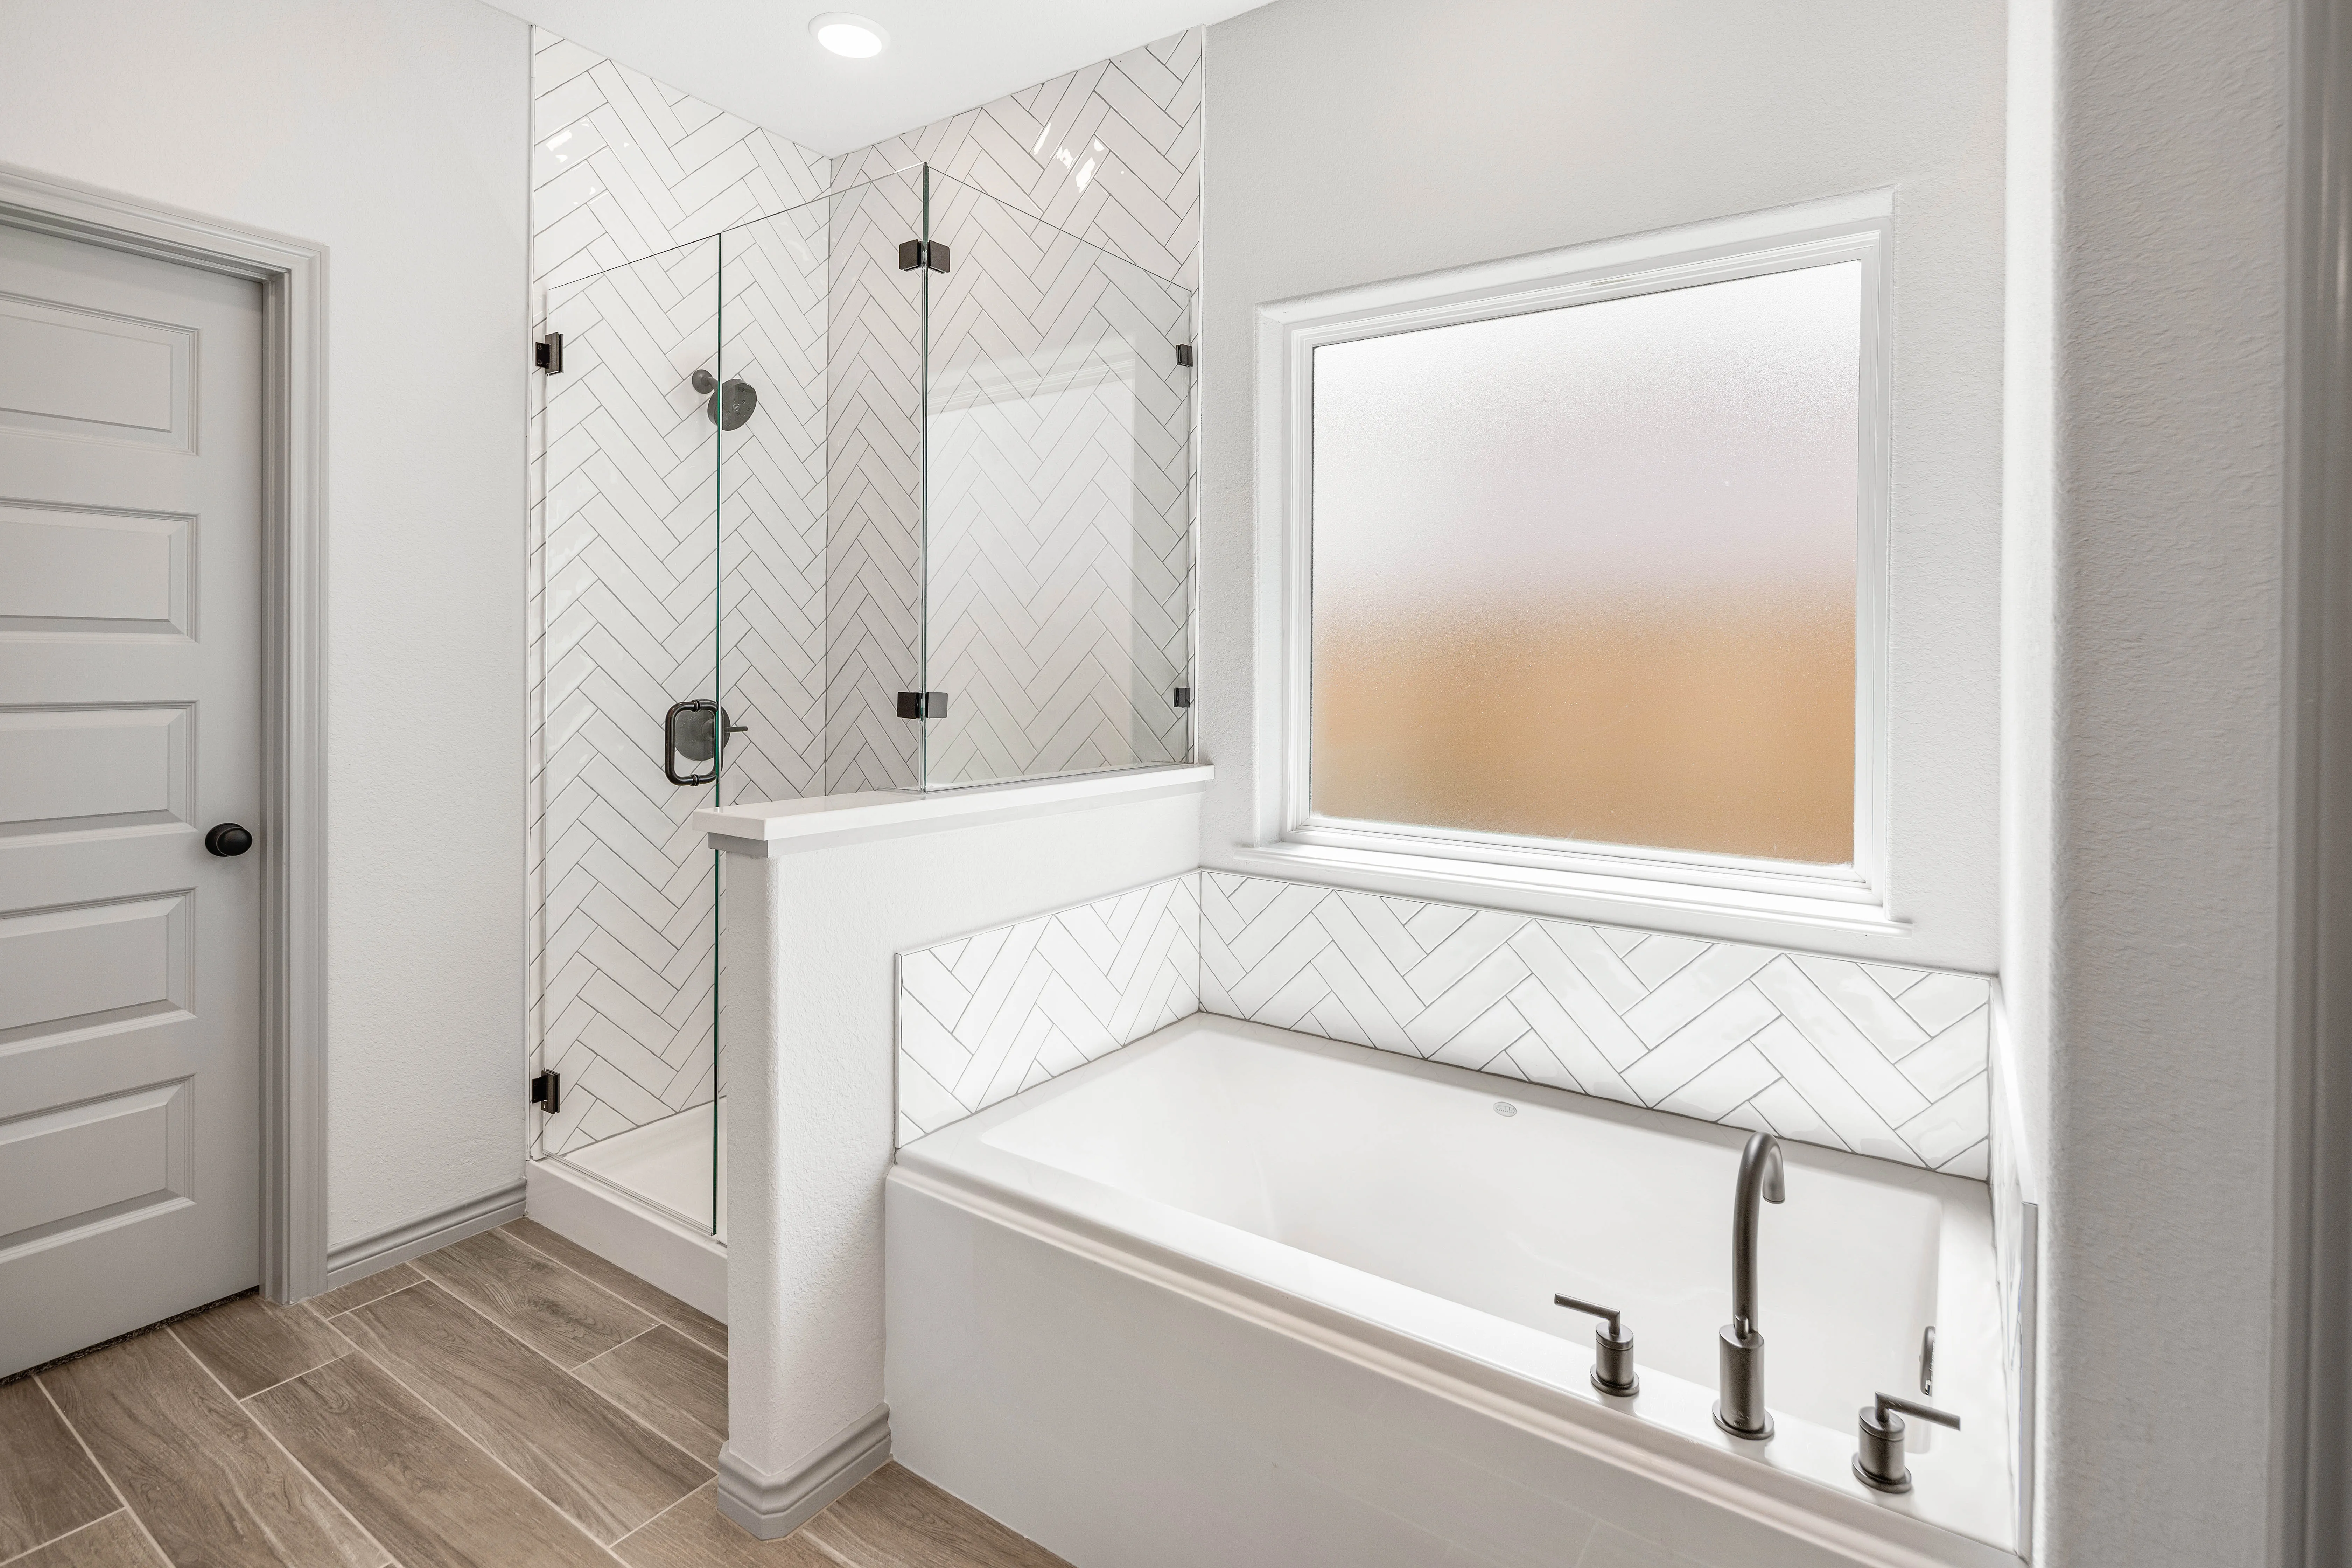 This is a Kaleo Homes master bathroom image for their new model home in Southern Pointe near College Station, TX.